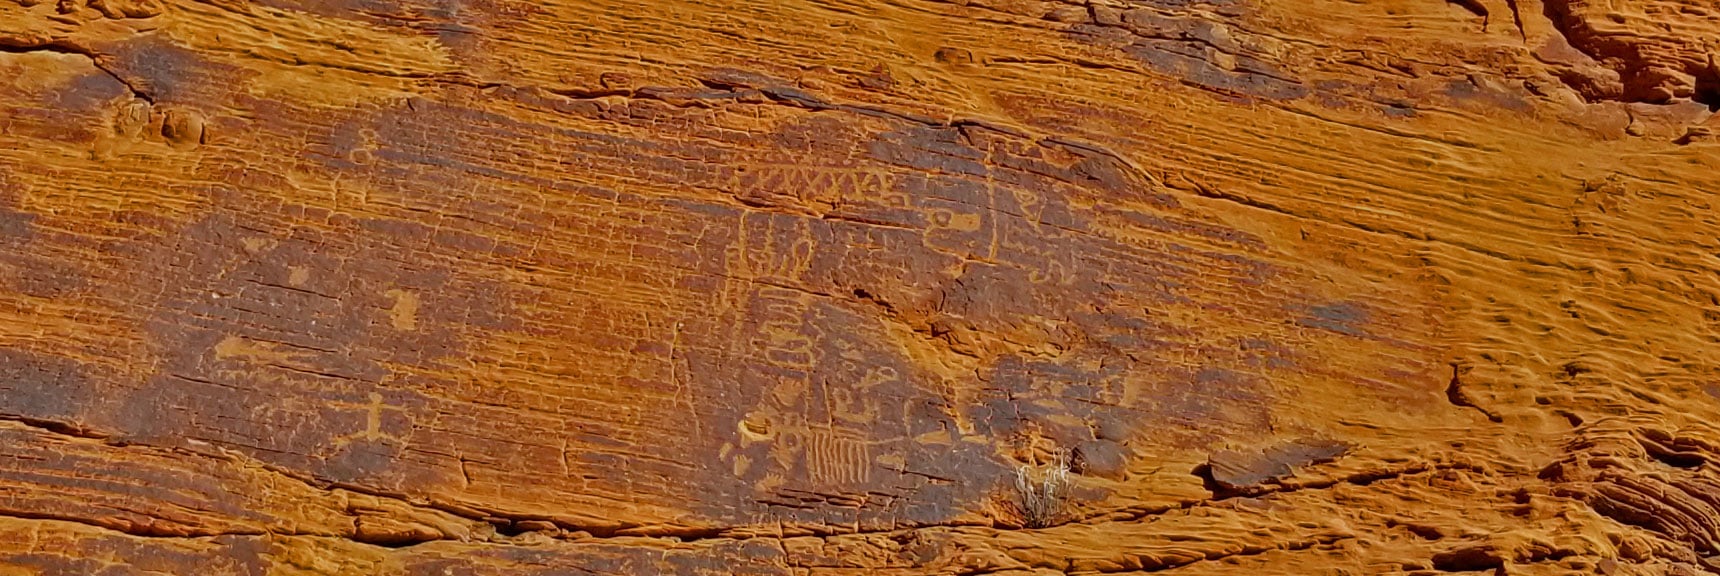 Petroglyphs on Mouse's Tank Trail in Valley of Fire State Park, Nevada, Slide 17